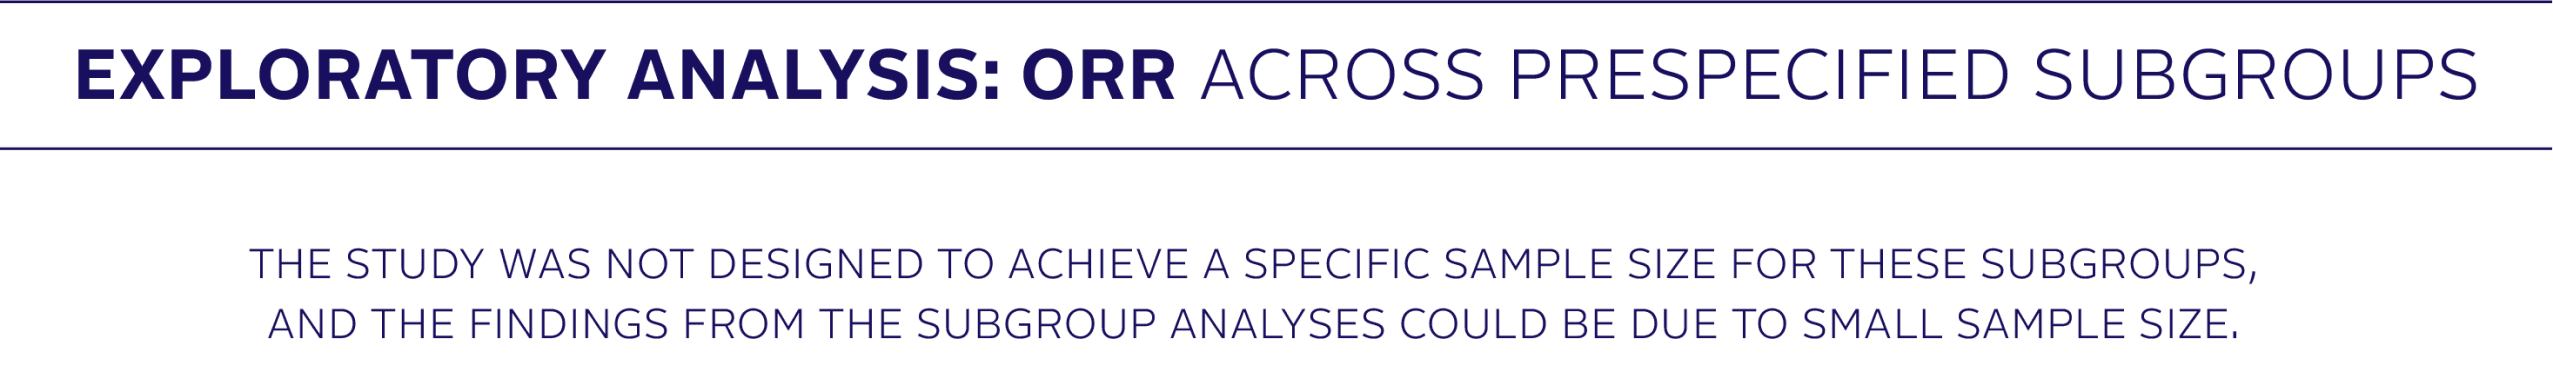 Exploratory Analysis: ORR across prespecified subgroups. The study was not designed to achieve a specific sample size for these subgroups, and the findings from the subgroup analyses could be due to small sample size.